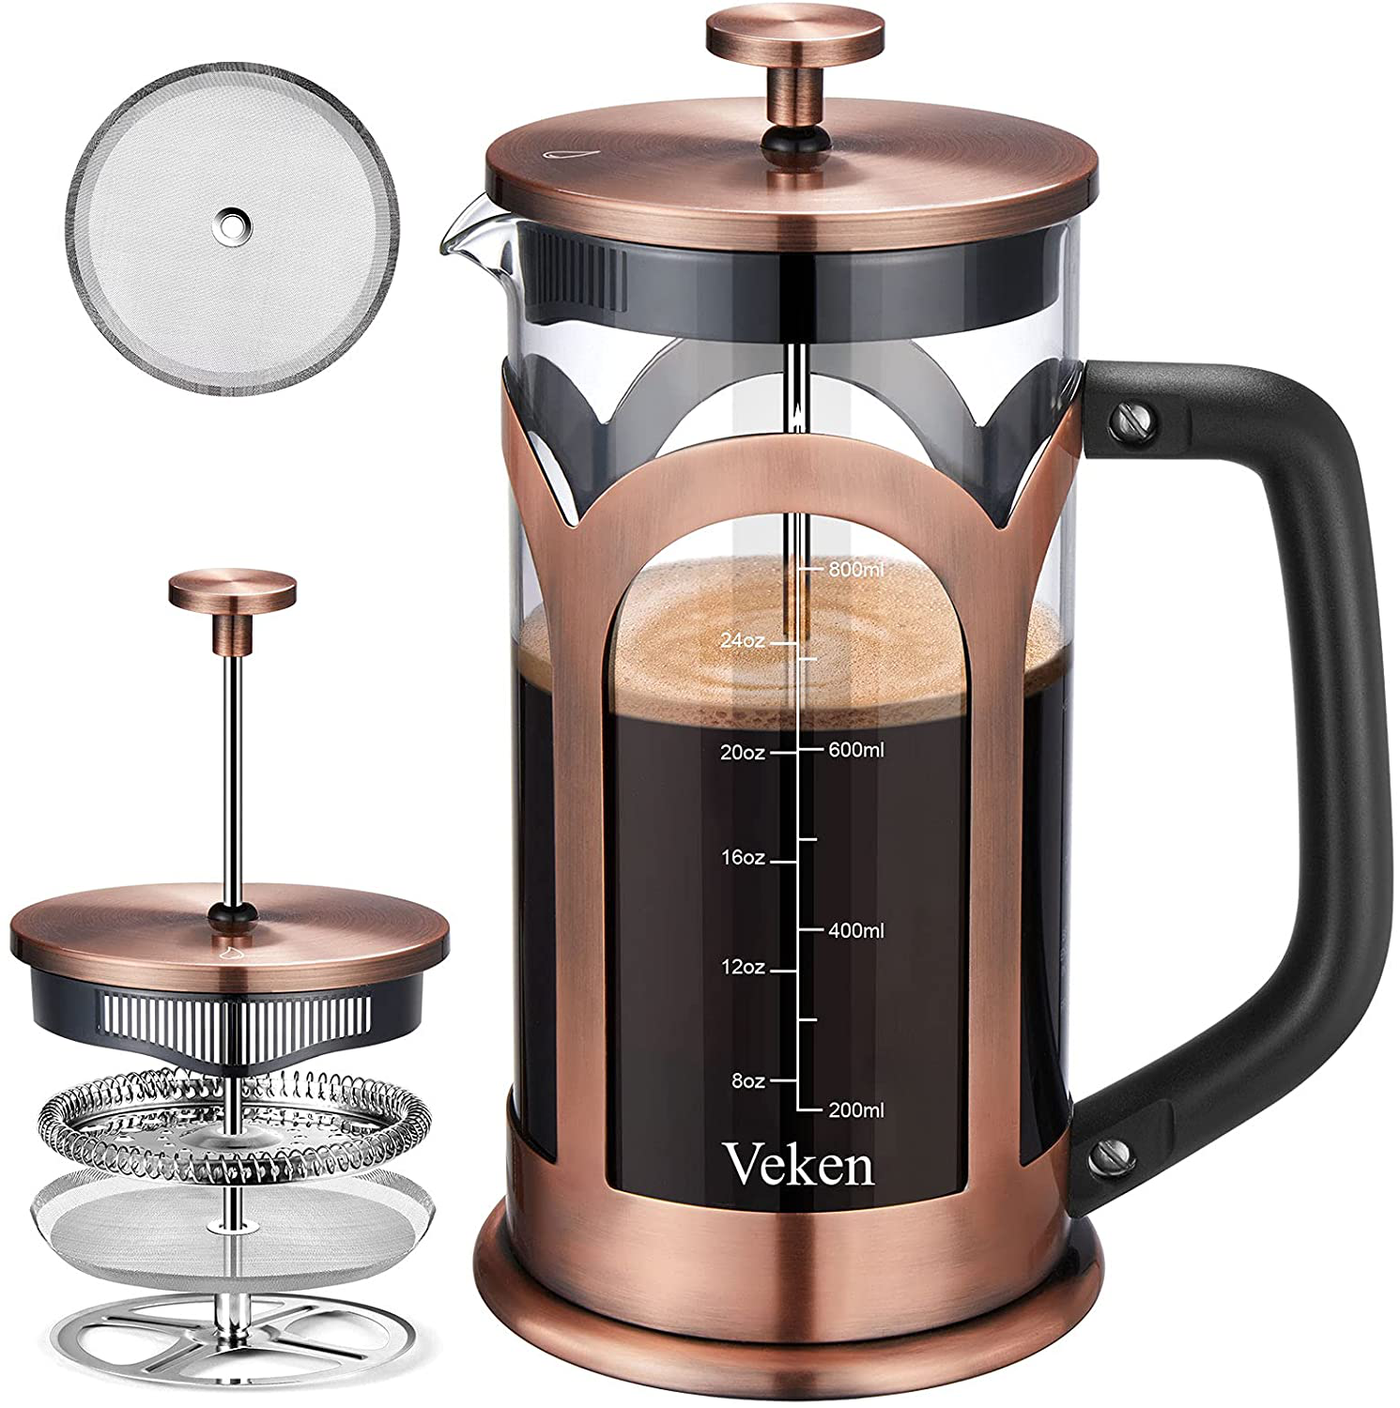 Veken French Press Coffee & Tea Maker, 304 Stainless Steel Heat Resistant Borosilicate Glass Coffee Press with 4 Filter Screens, Durable Easy Clean 100% BPA Free, 34oz, Copper